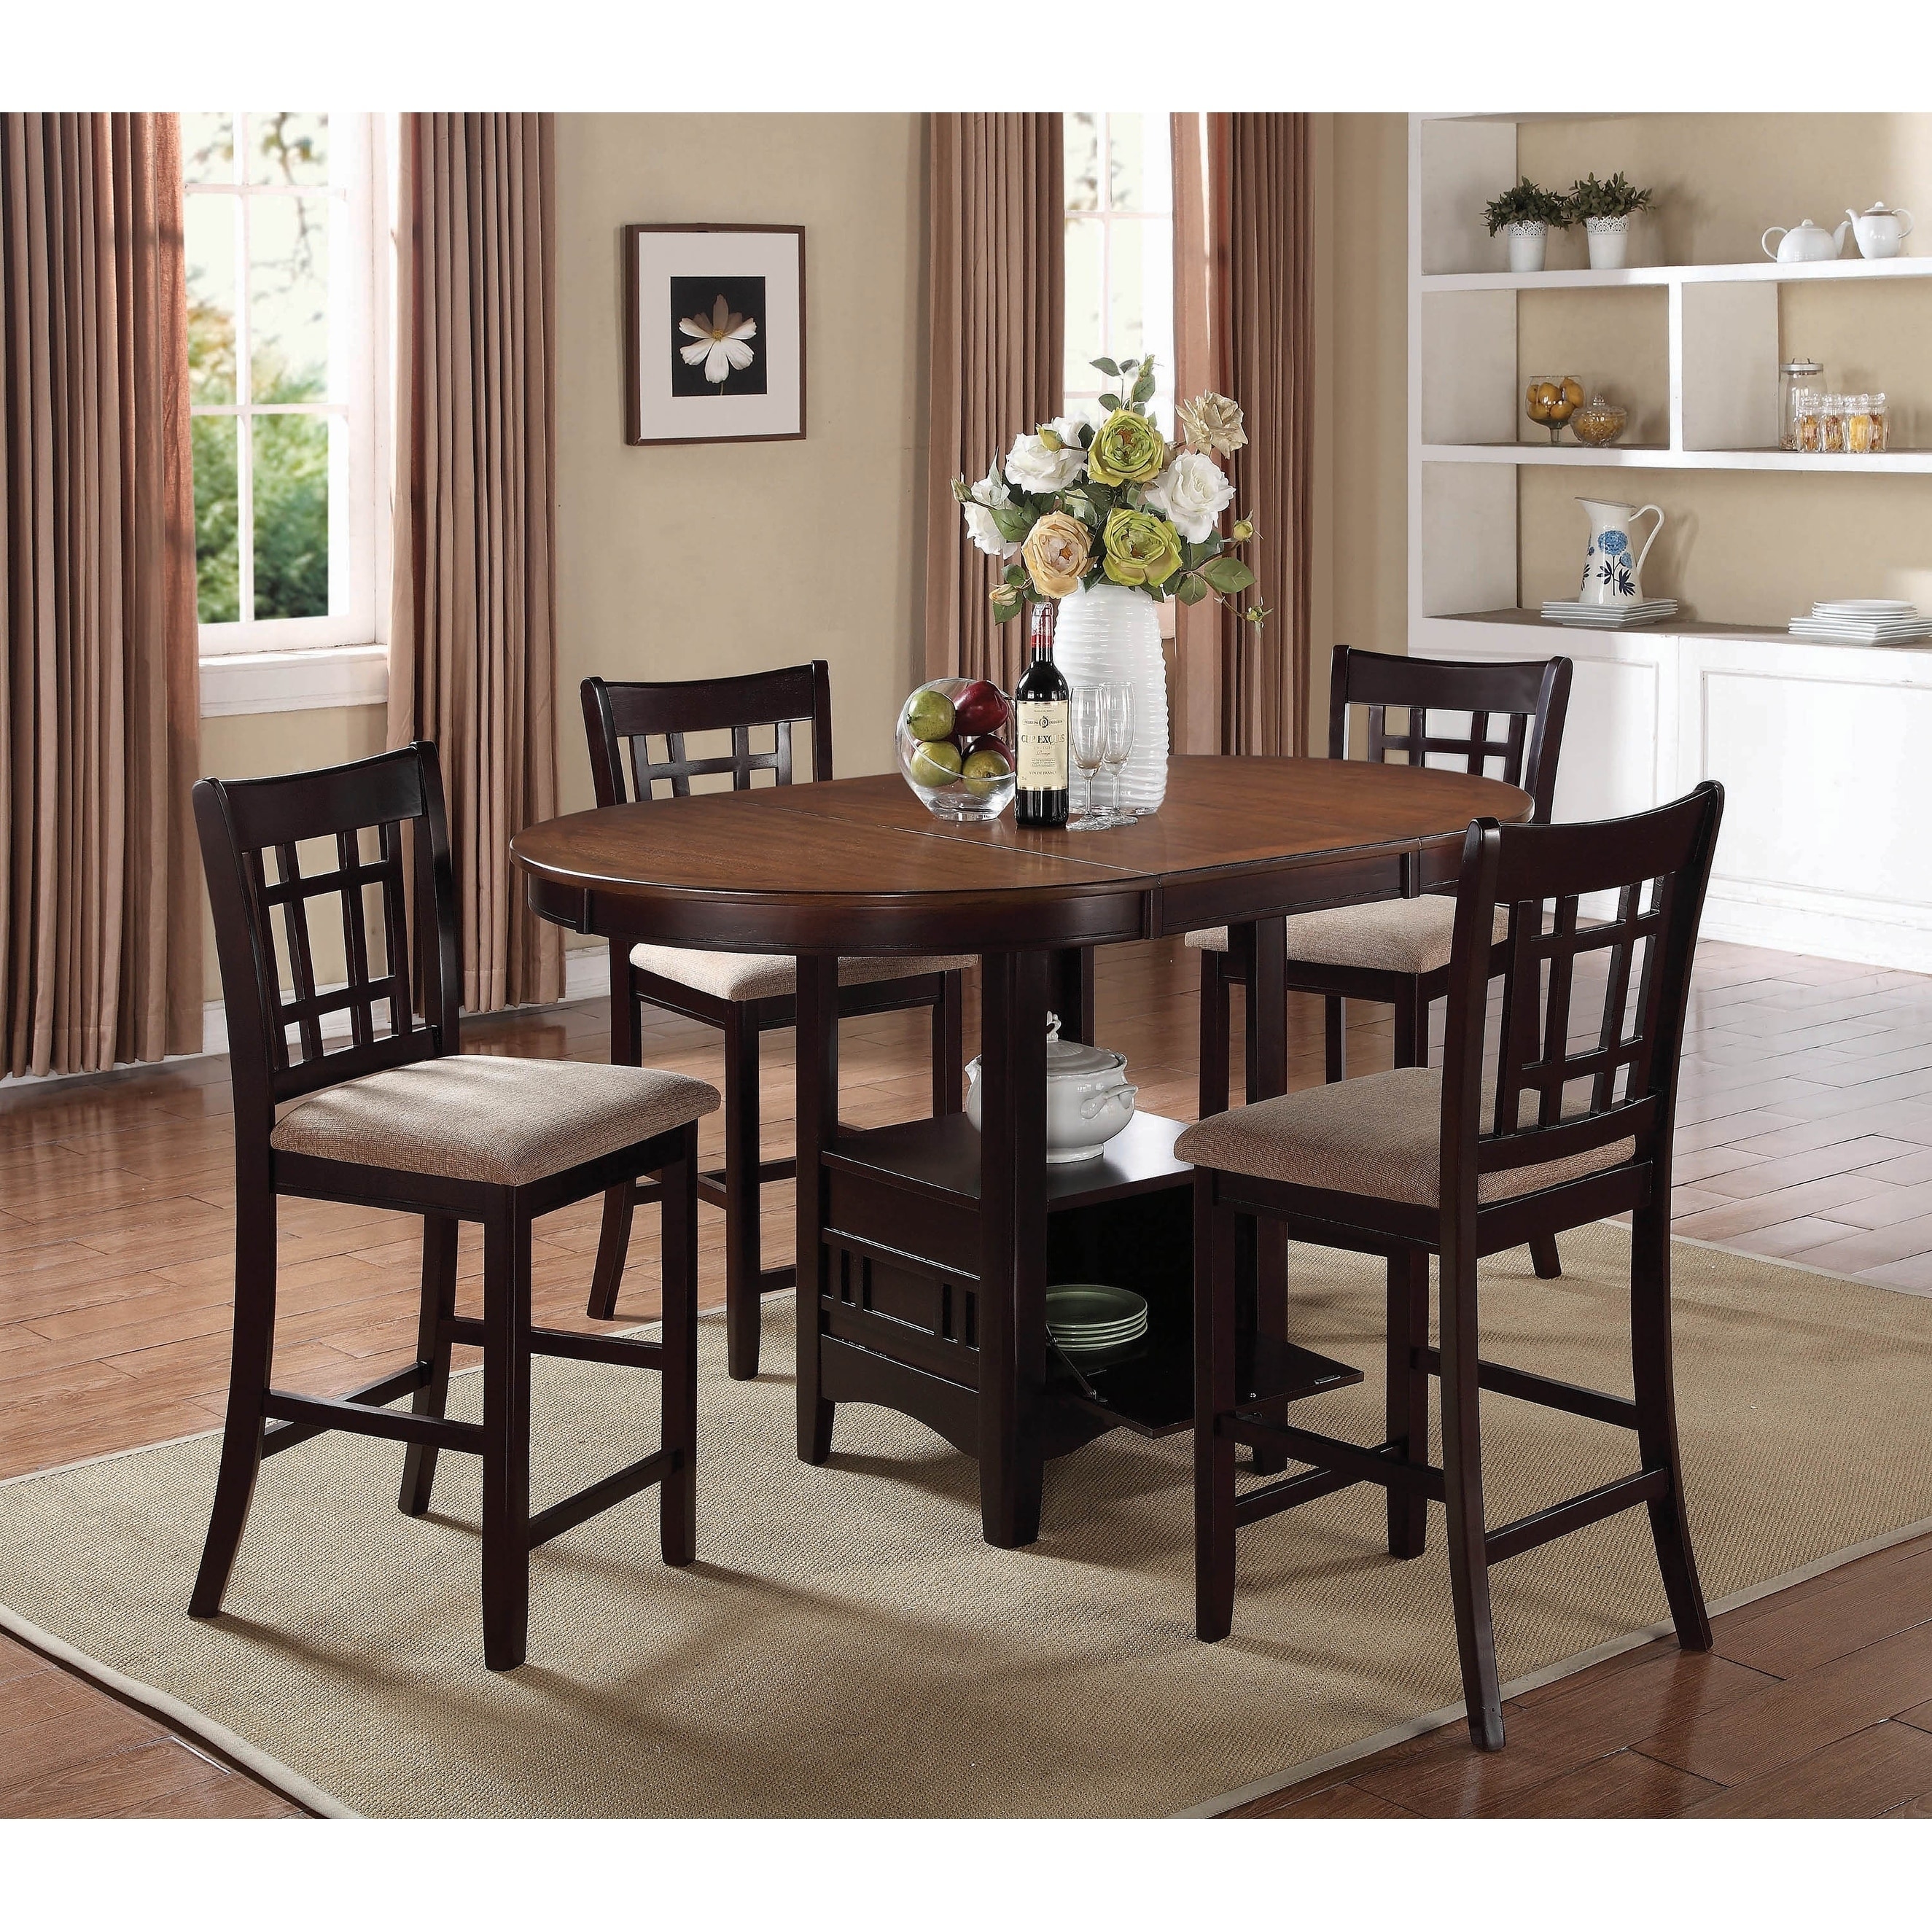 Danford Tan And Espresso 7 Piece Counter Height Dining Set